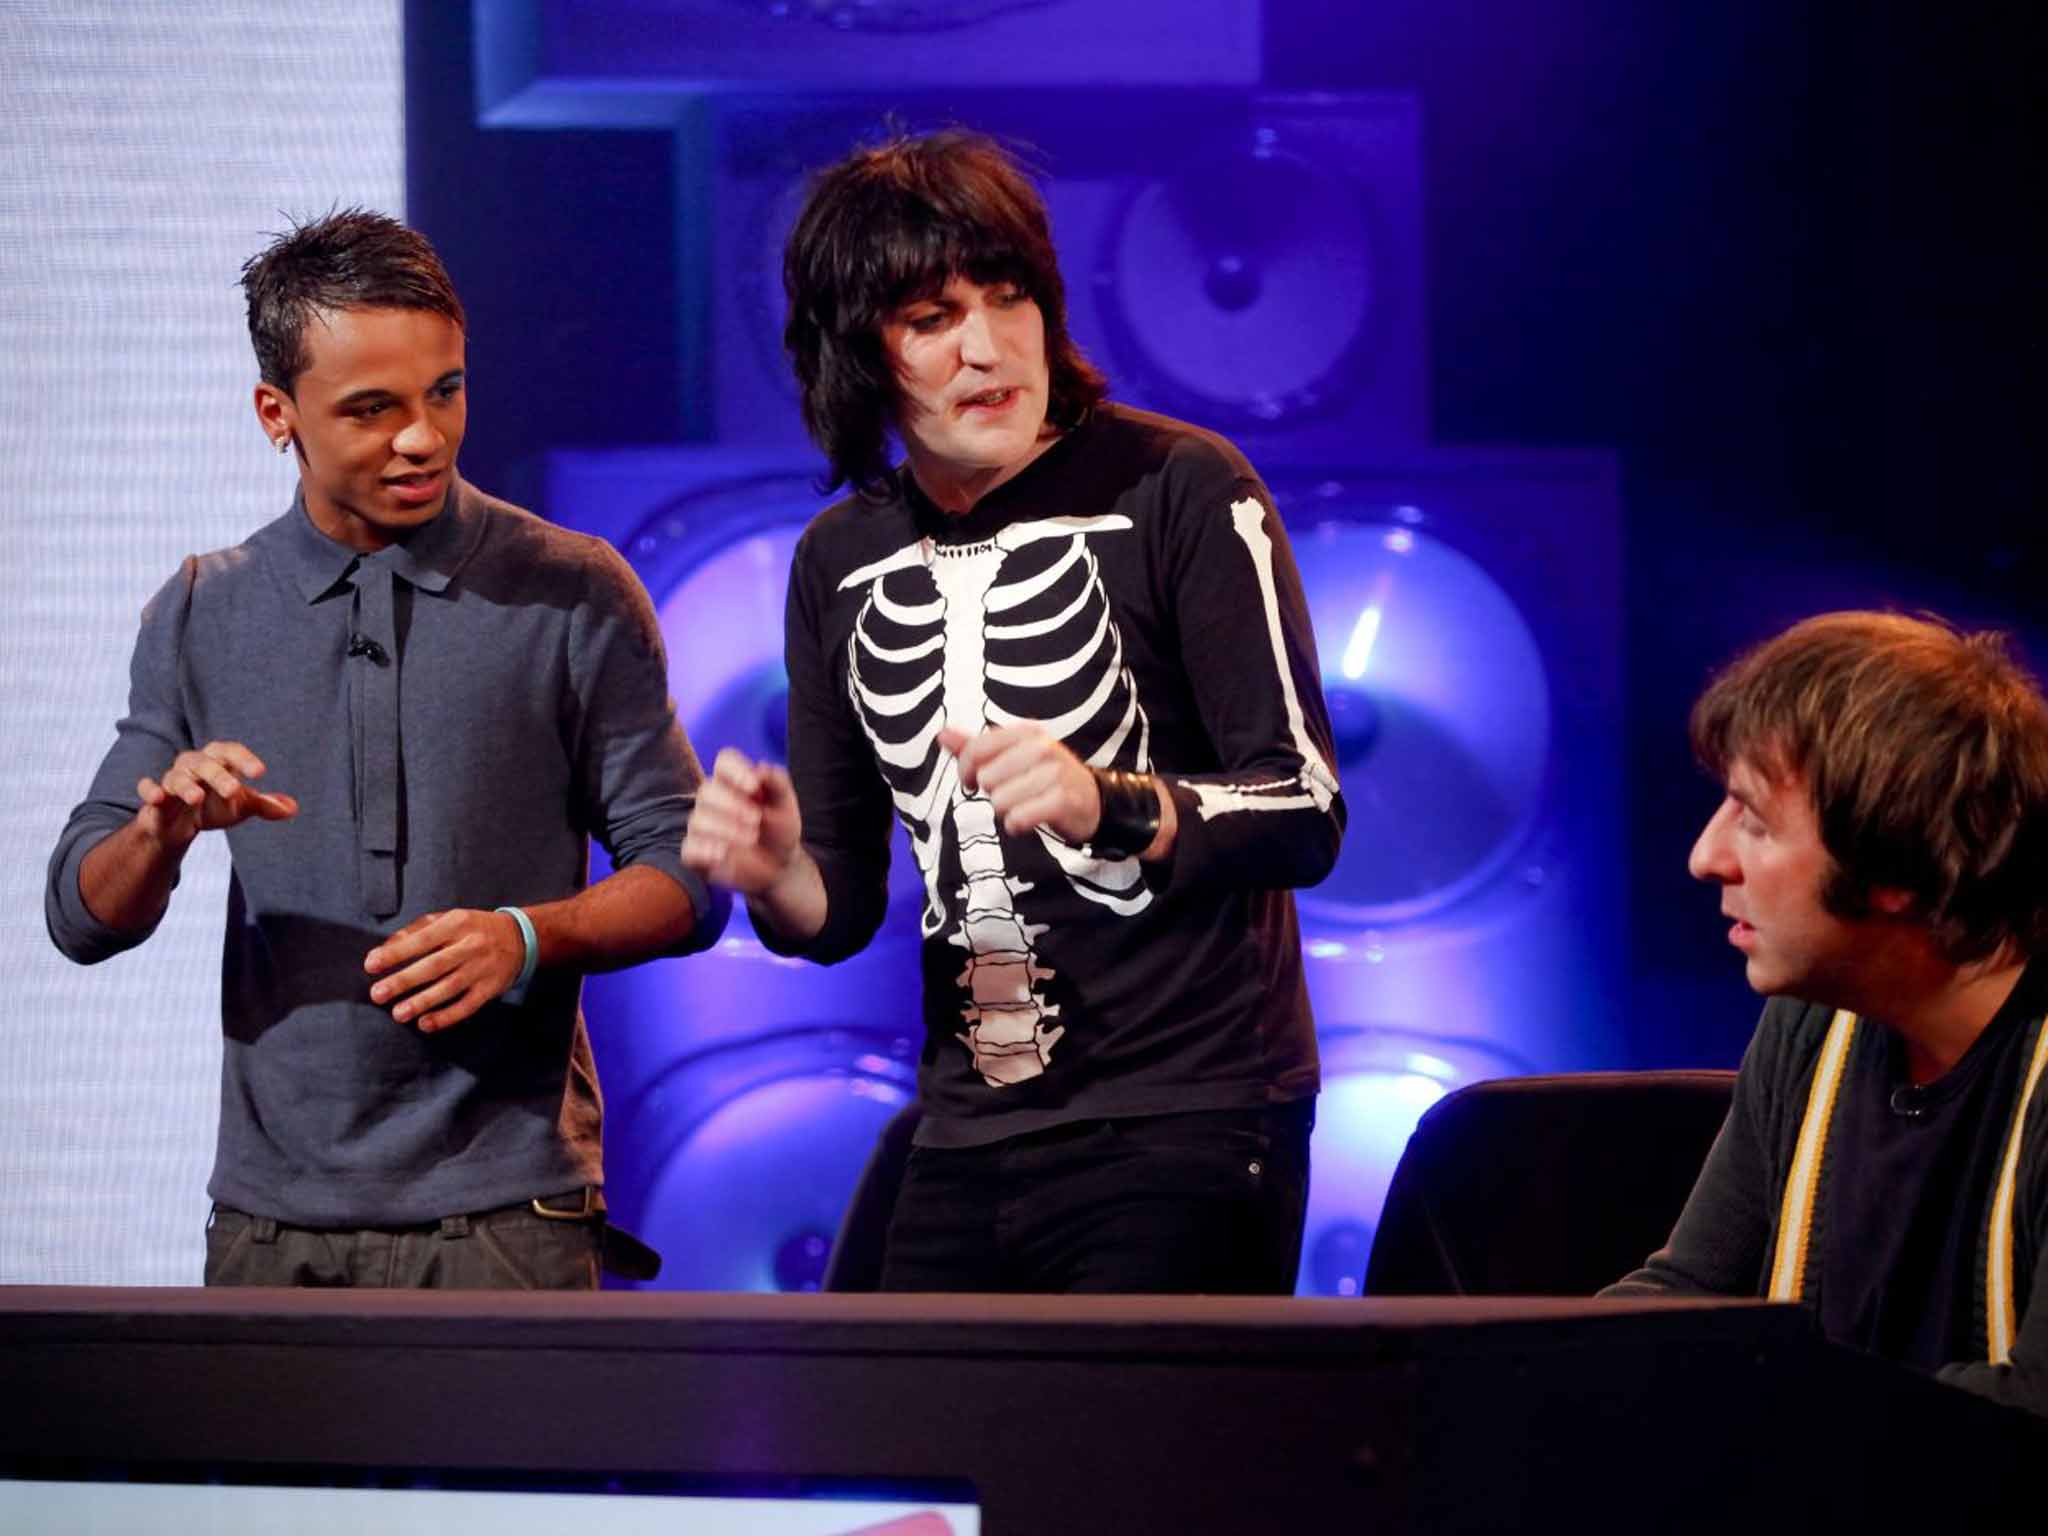 In 2009, his first year as a captain on 'Never Mind the Buzzcocks', with singer Aston Merrygold of JLS and the comedian David O'Doherty